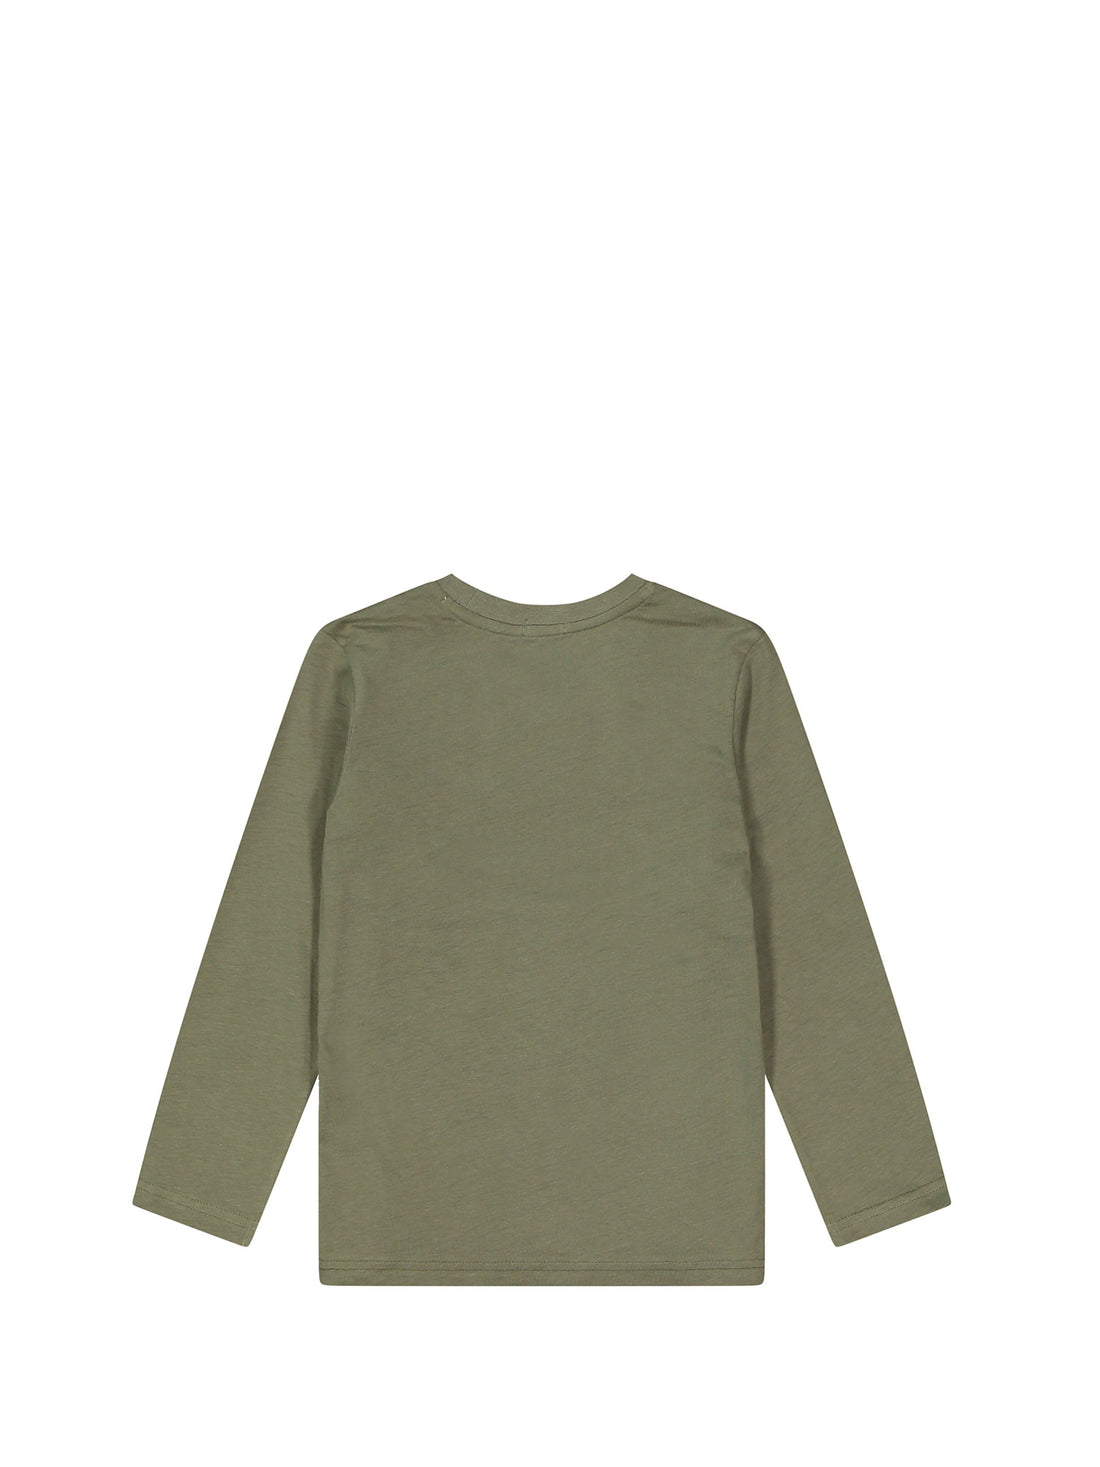 T-shirt Verde Scuro Melby